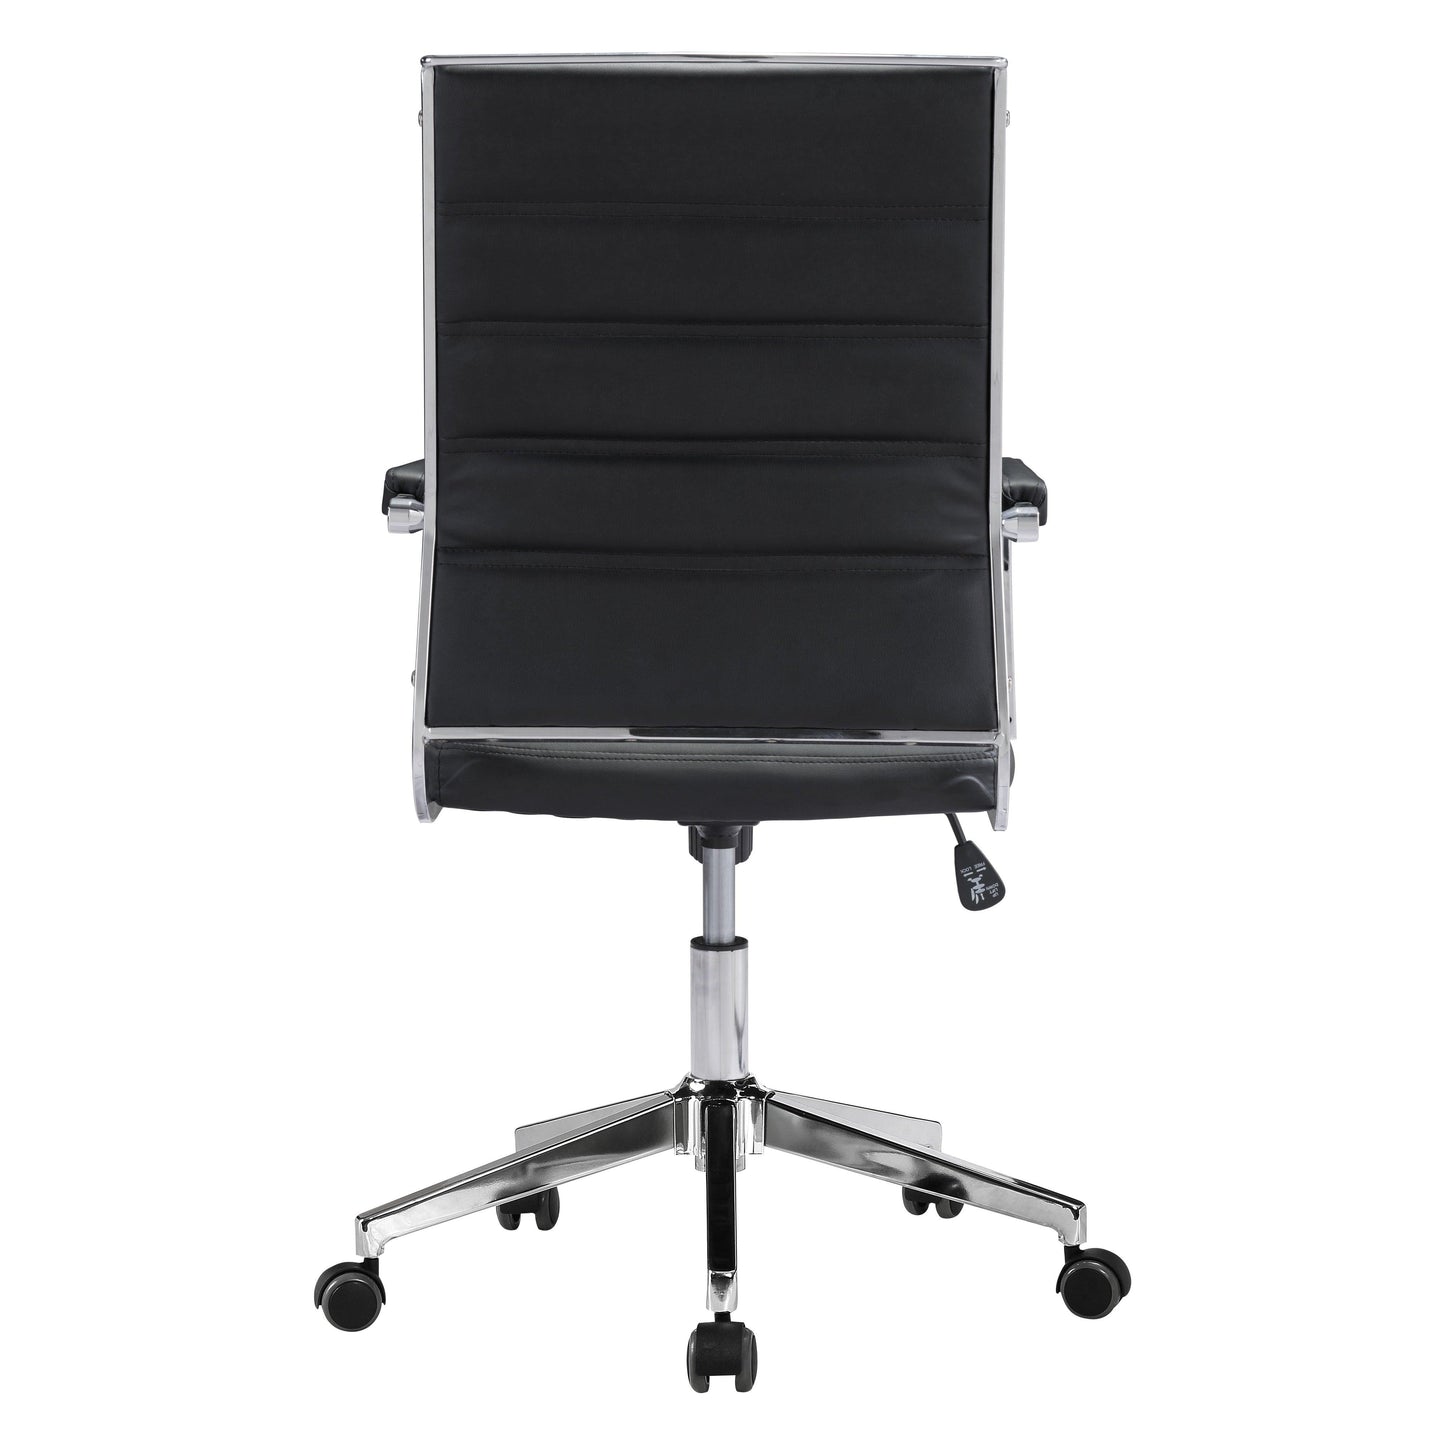 Liderato Office Chair Black - Sideboards and Things Brand_Zuo Modern, Color_Black, Color_Silver, Depth_20-30, Features_Adjustable Height, Features_Swivel, Finish_Polished, Height_30-40, Materials_Metal, Materials_Upholstery, Metal Type_Steel, Upholstery Type_Leather, Upholstery Type_Vegan Leather, Width_20-30